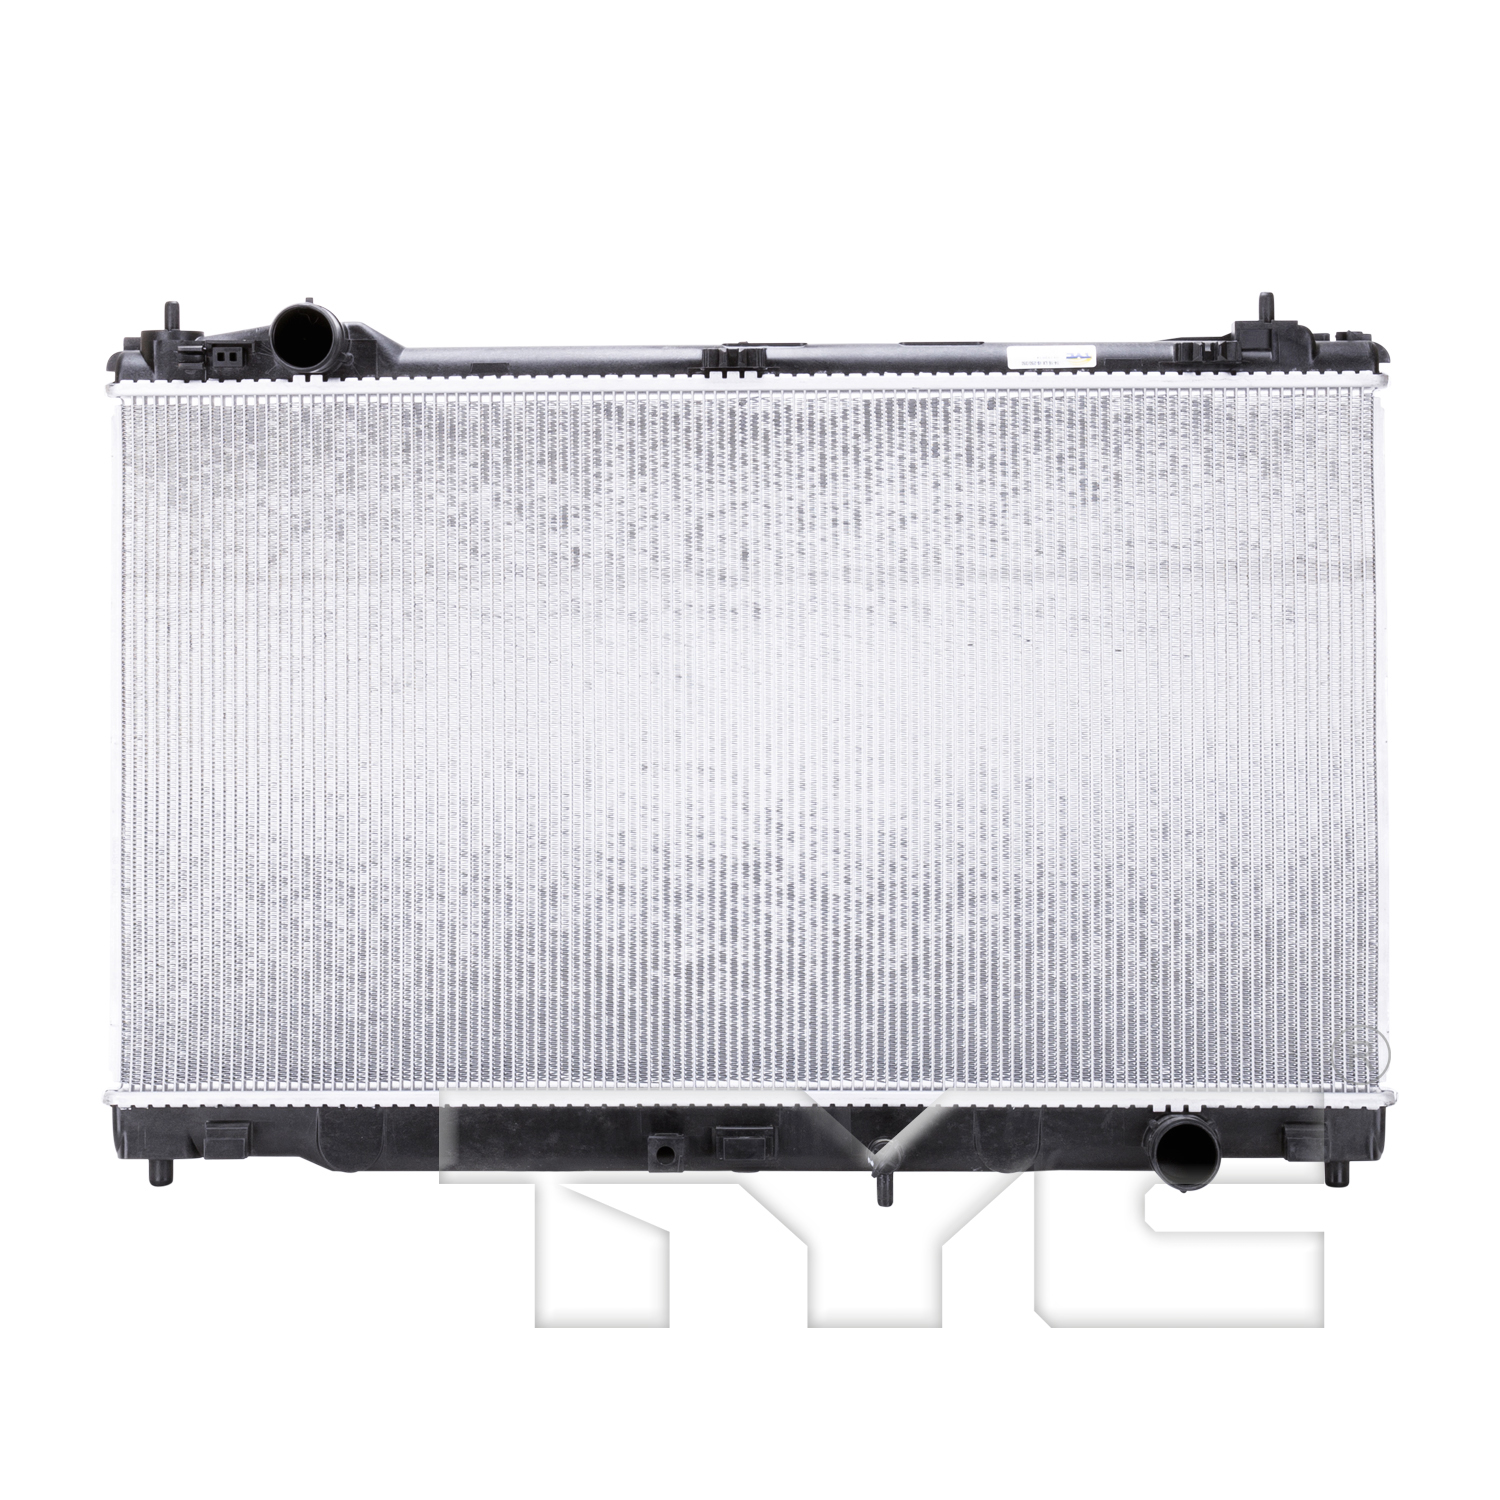 Aftermarket RADIATORS for LEXUS - IS200T, IS200t,16-17,Radiator assembly